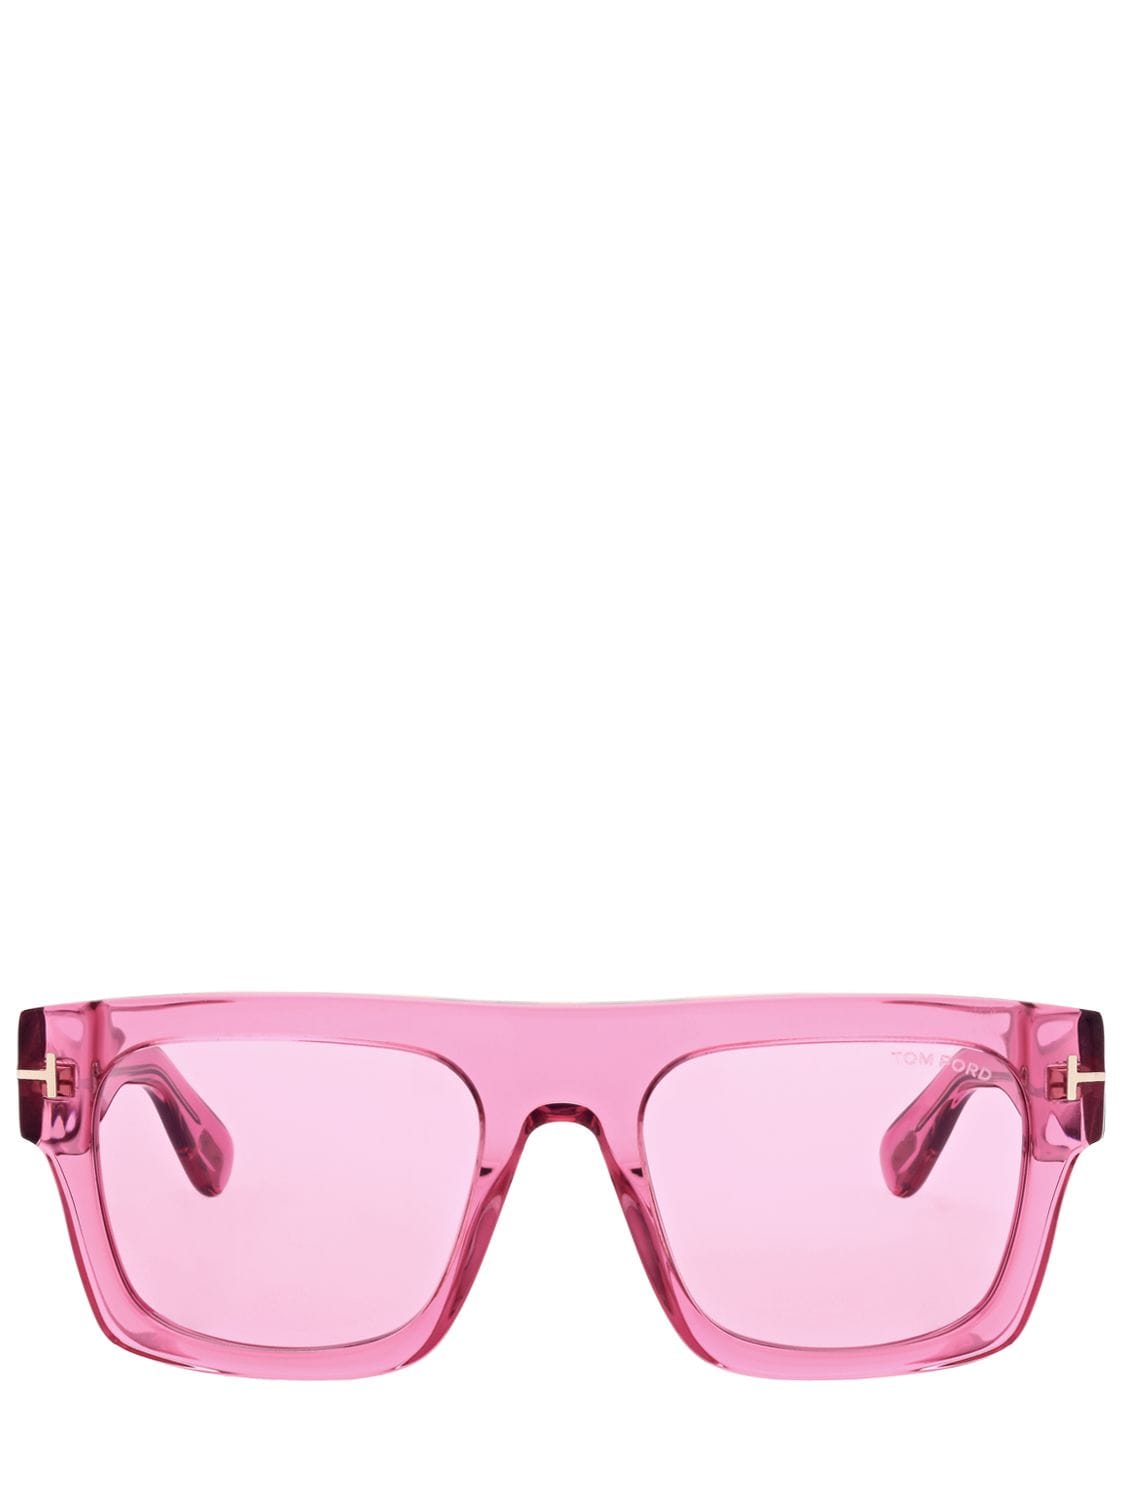 TOM FORD Fausto Squared Acetate Sunglasses pour femmes